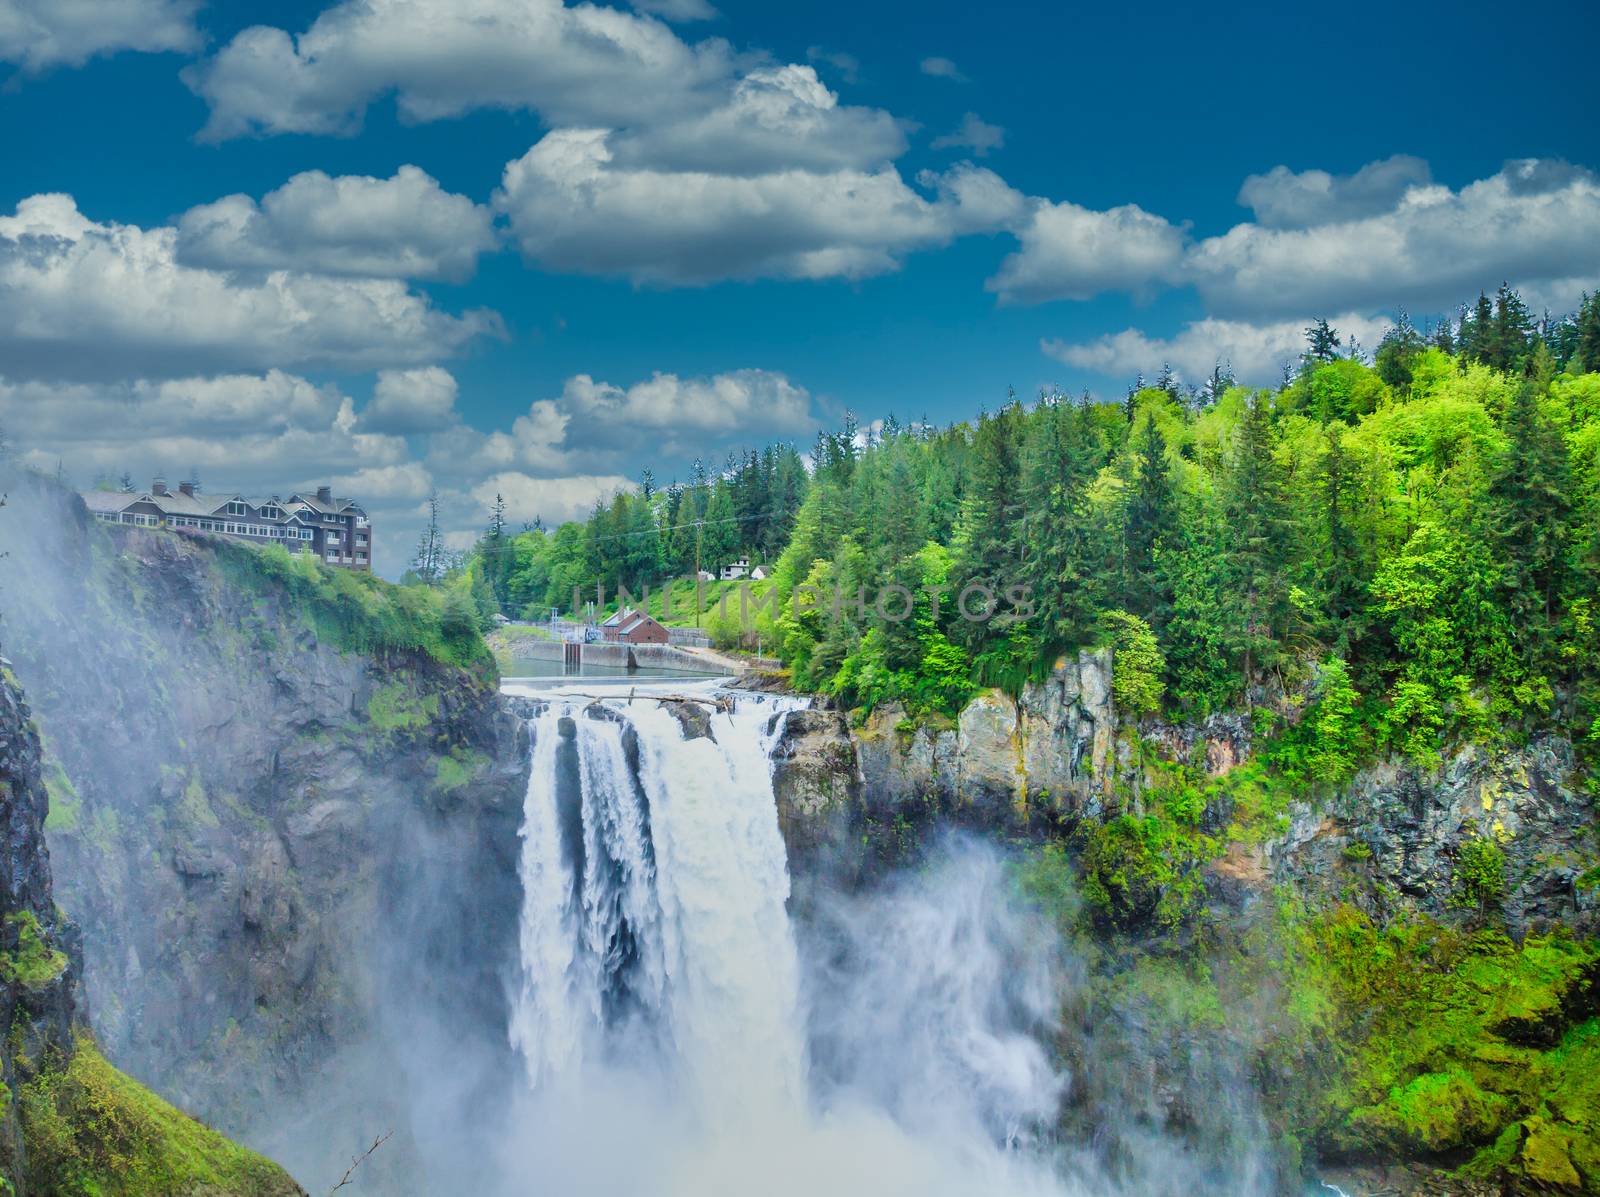 Snoqualmie Falls near Seattle, Washington in the Pacific Northwest